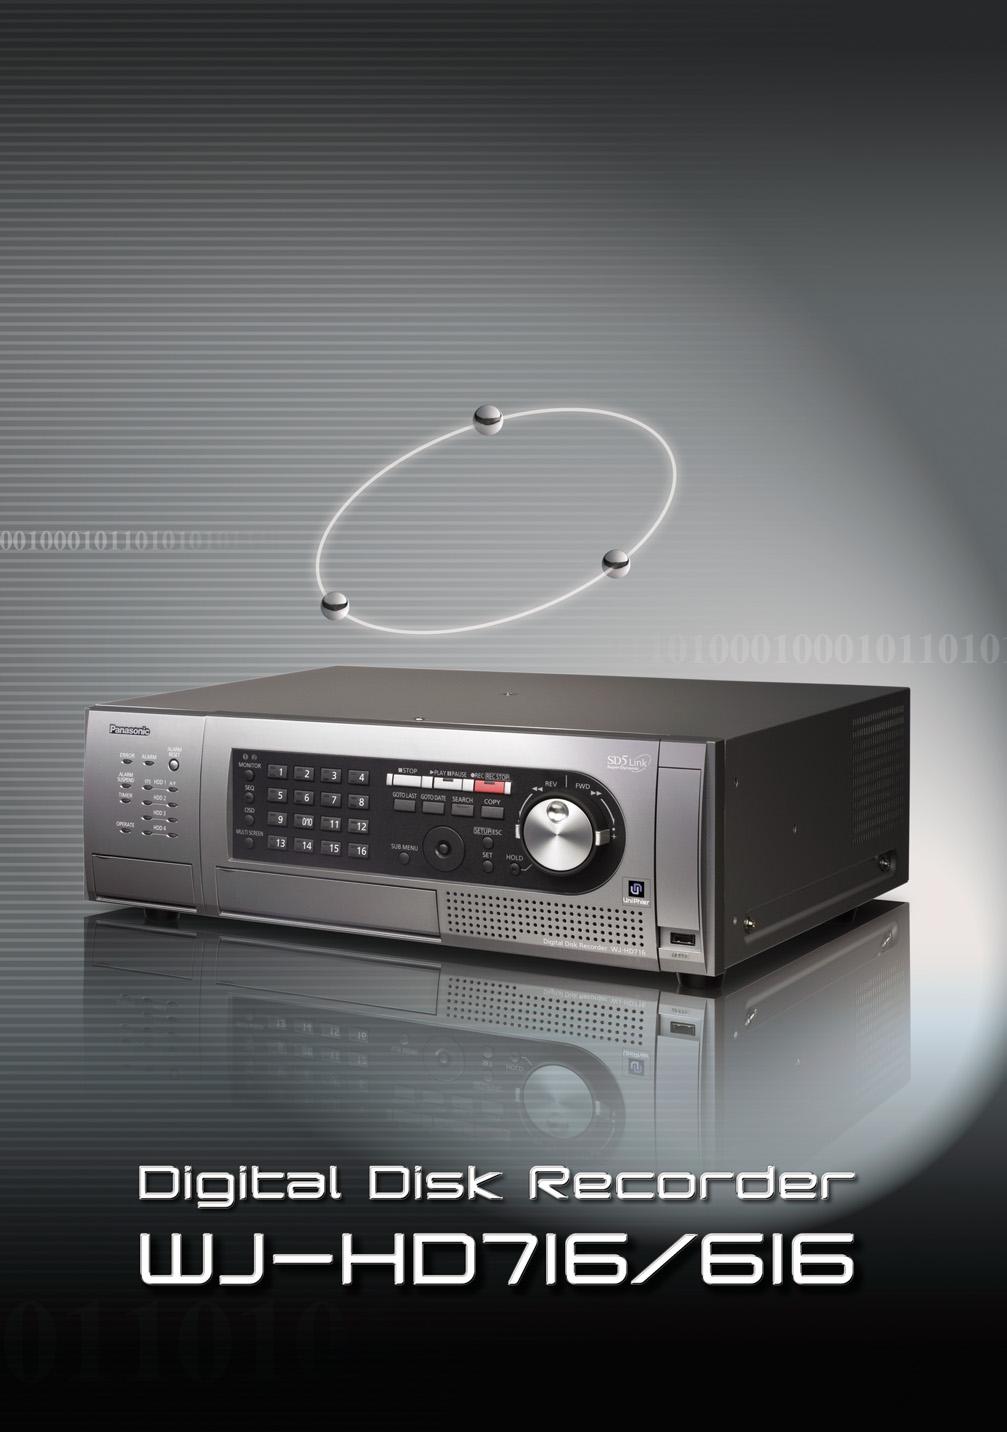 16ch Real-time H.264 Digital Disk Recorder WJ-HD716 16ch H.